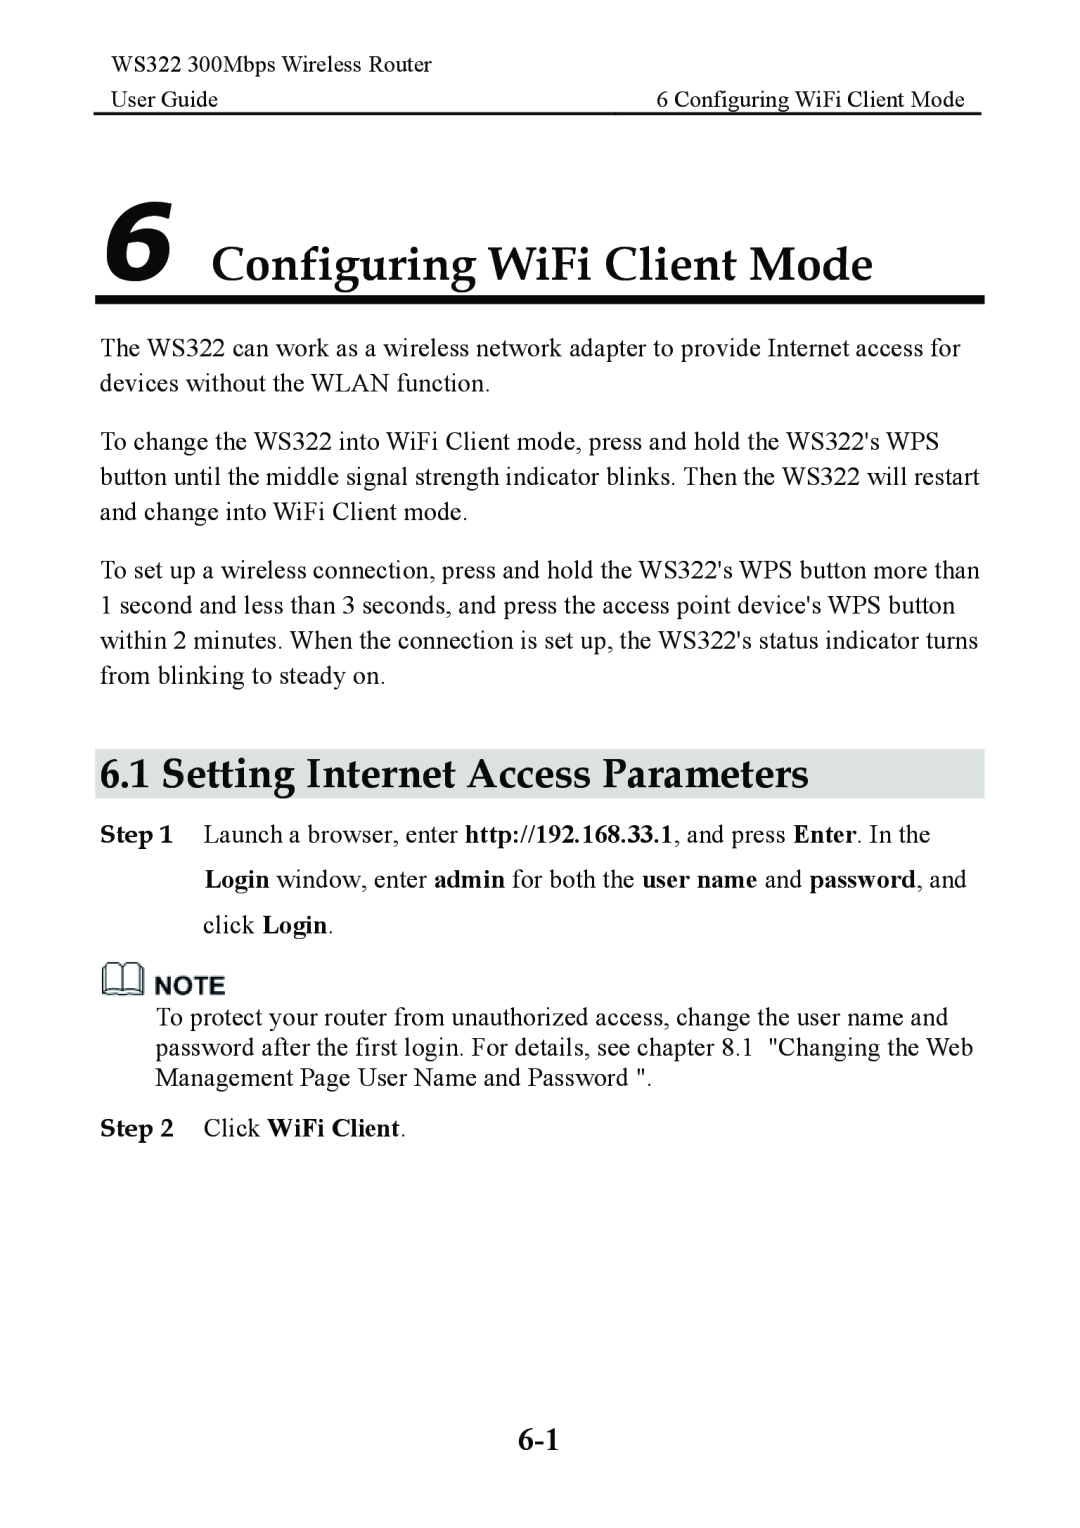 Huawei WS322 manual Configuring WiFi Client Mode, Setting Internet Access Parameters, Click WiFi Client 